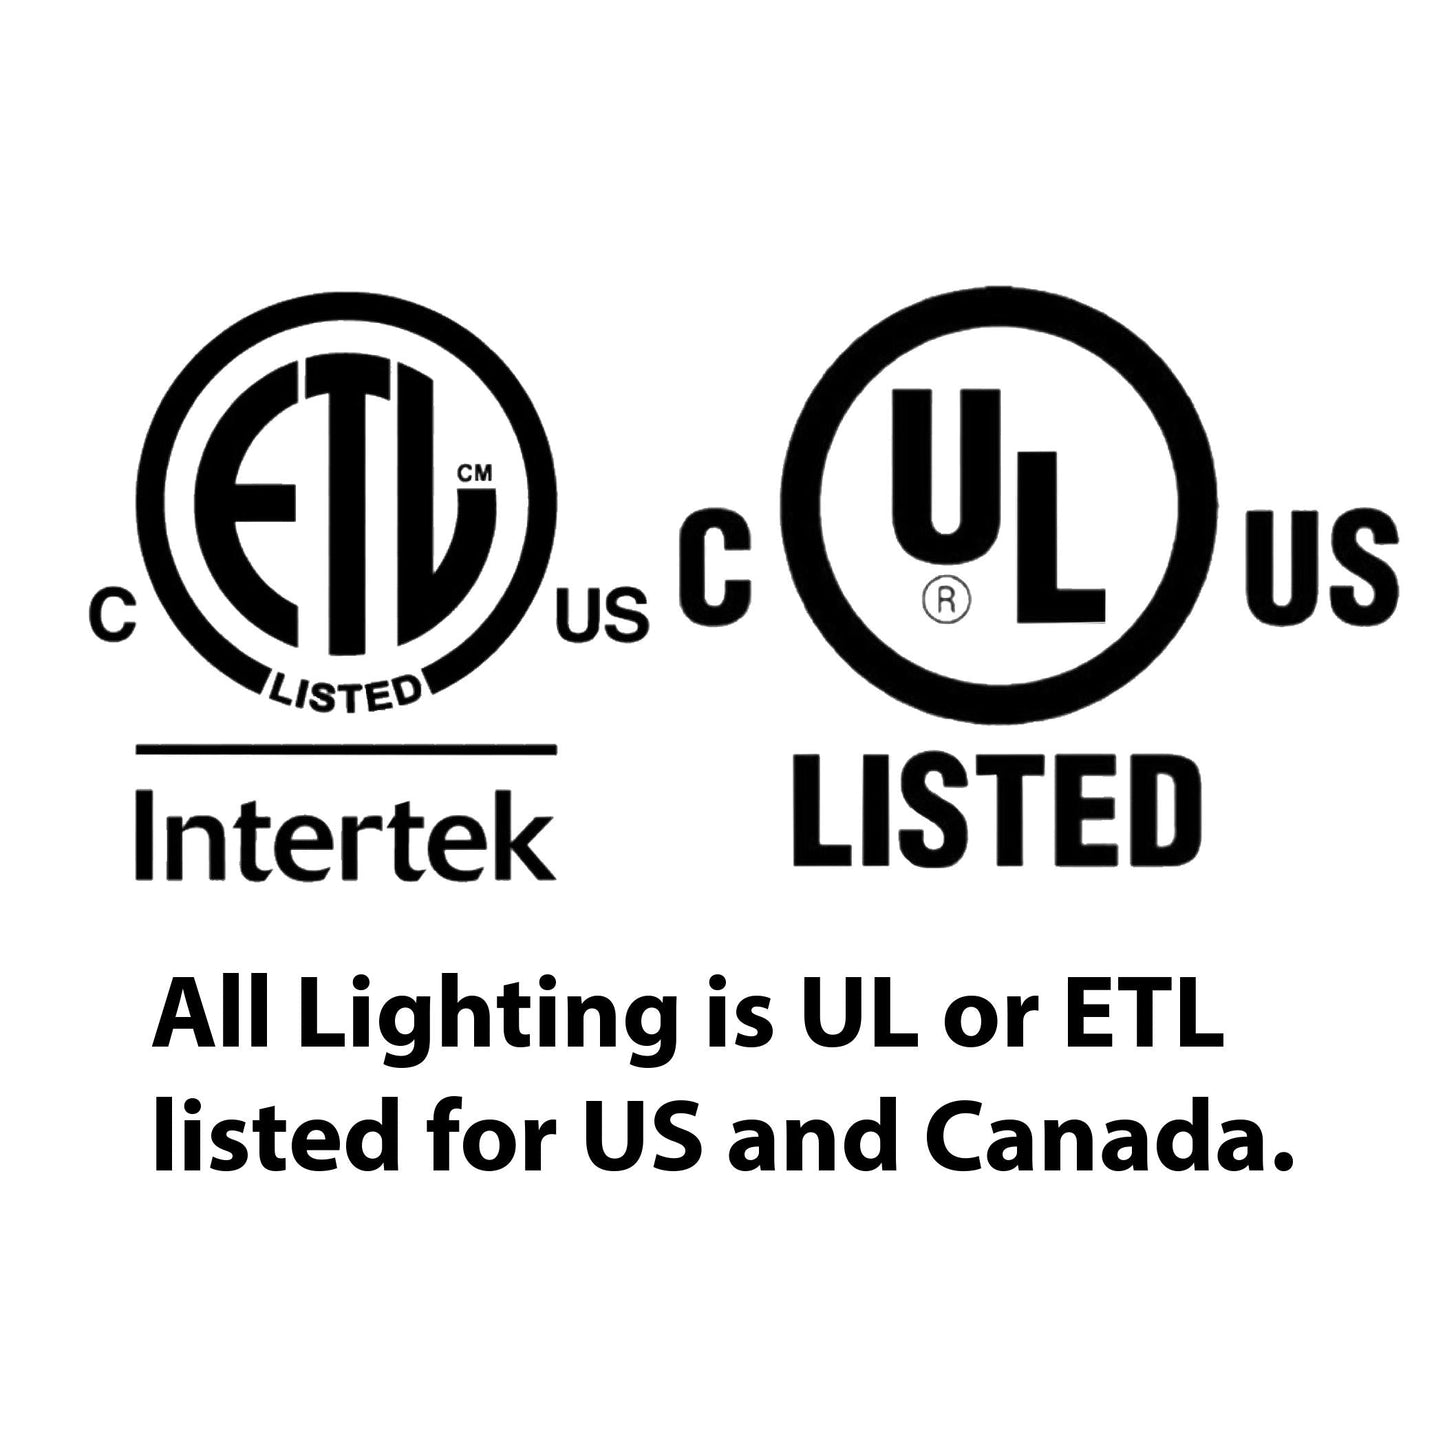 Bicycle Glass Co UL and ETL Certified in U.S. and Canada